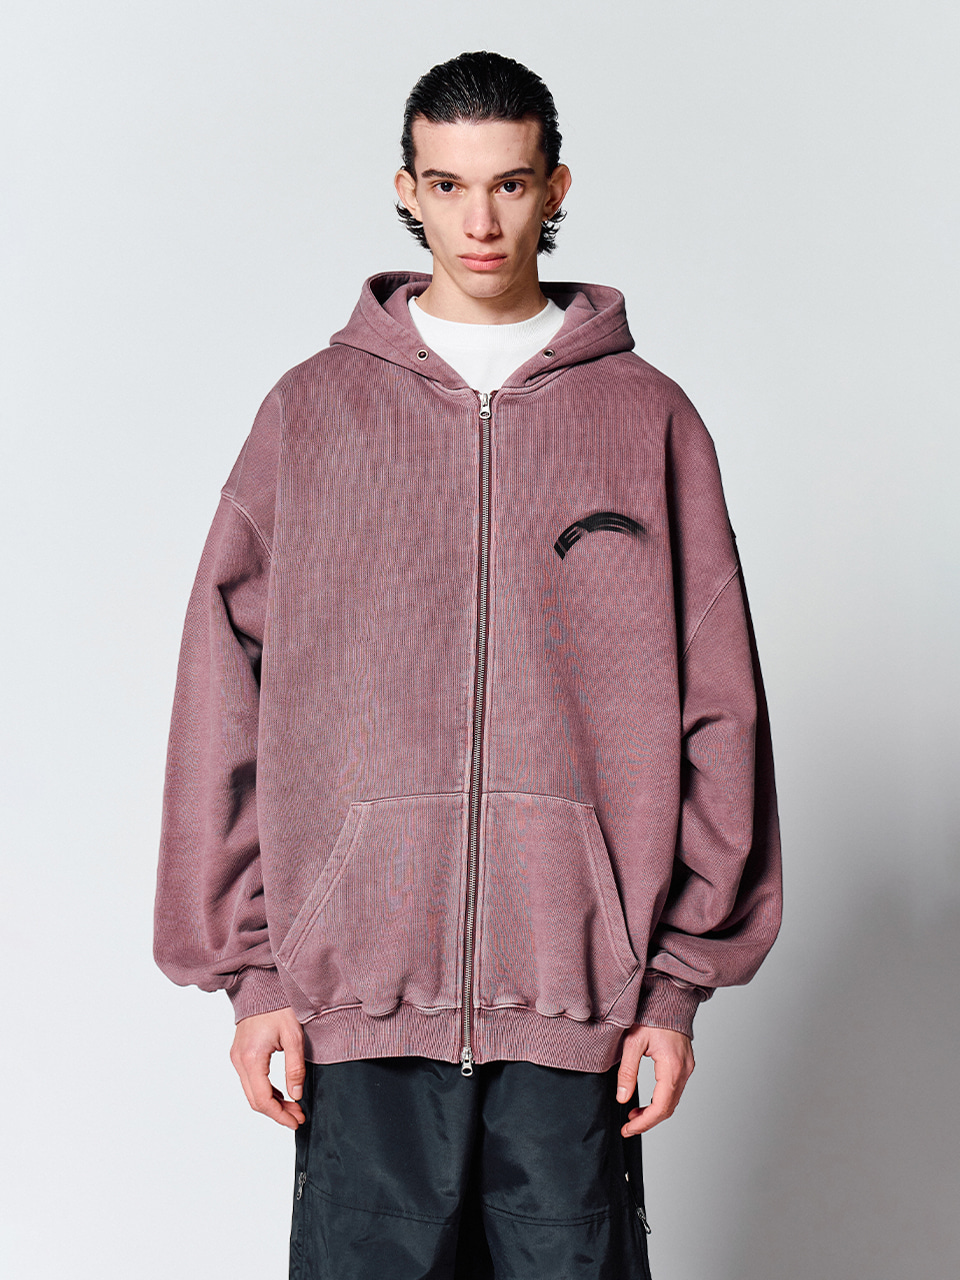 IEY - OVERSIZED MOTION LOGO HOODED ZIP-UP Red